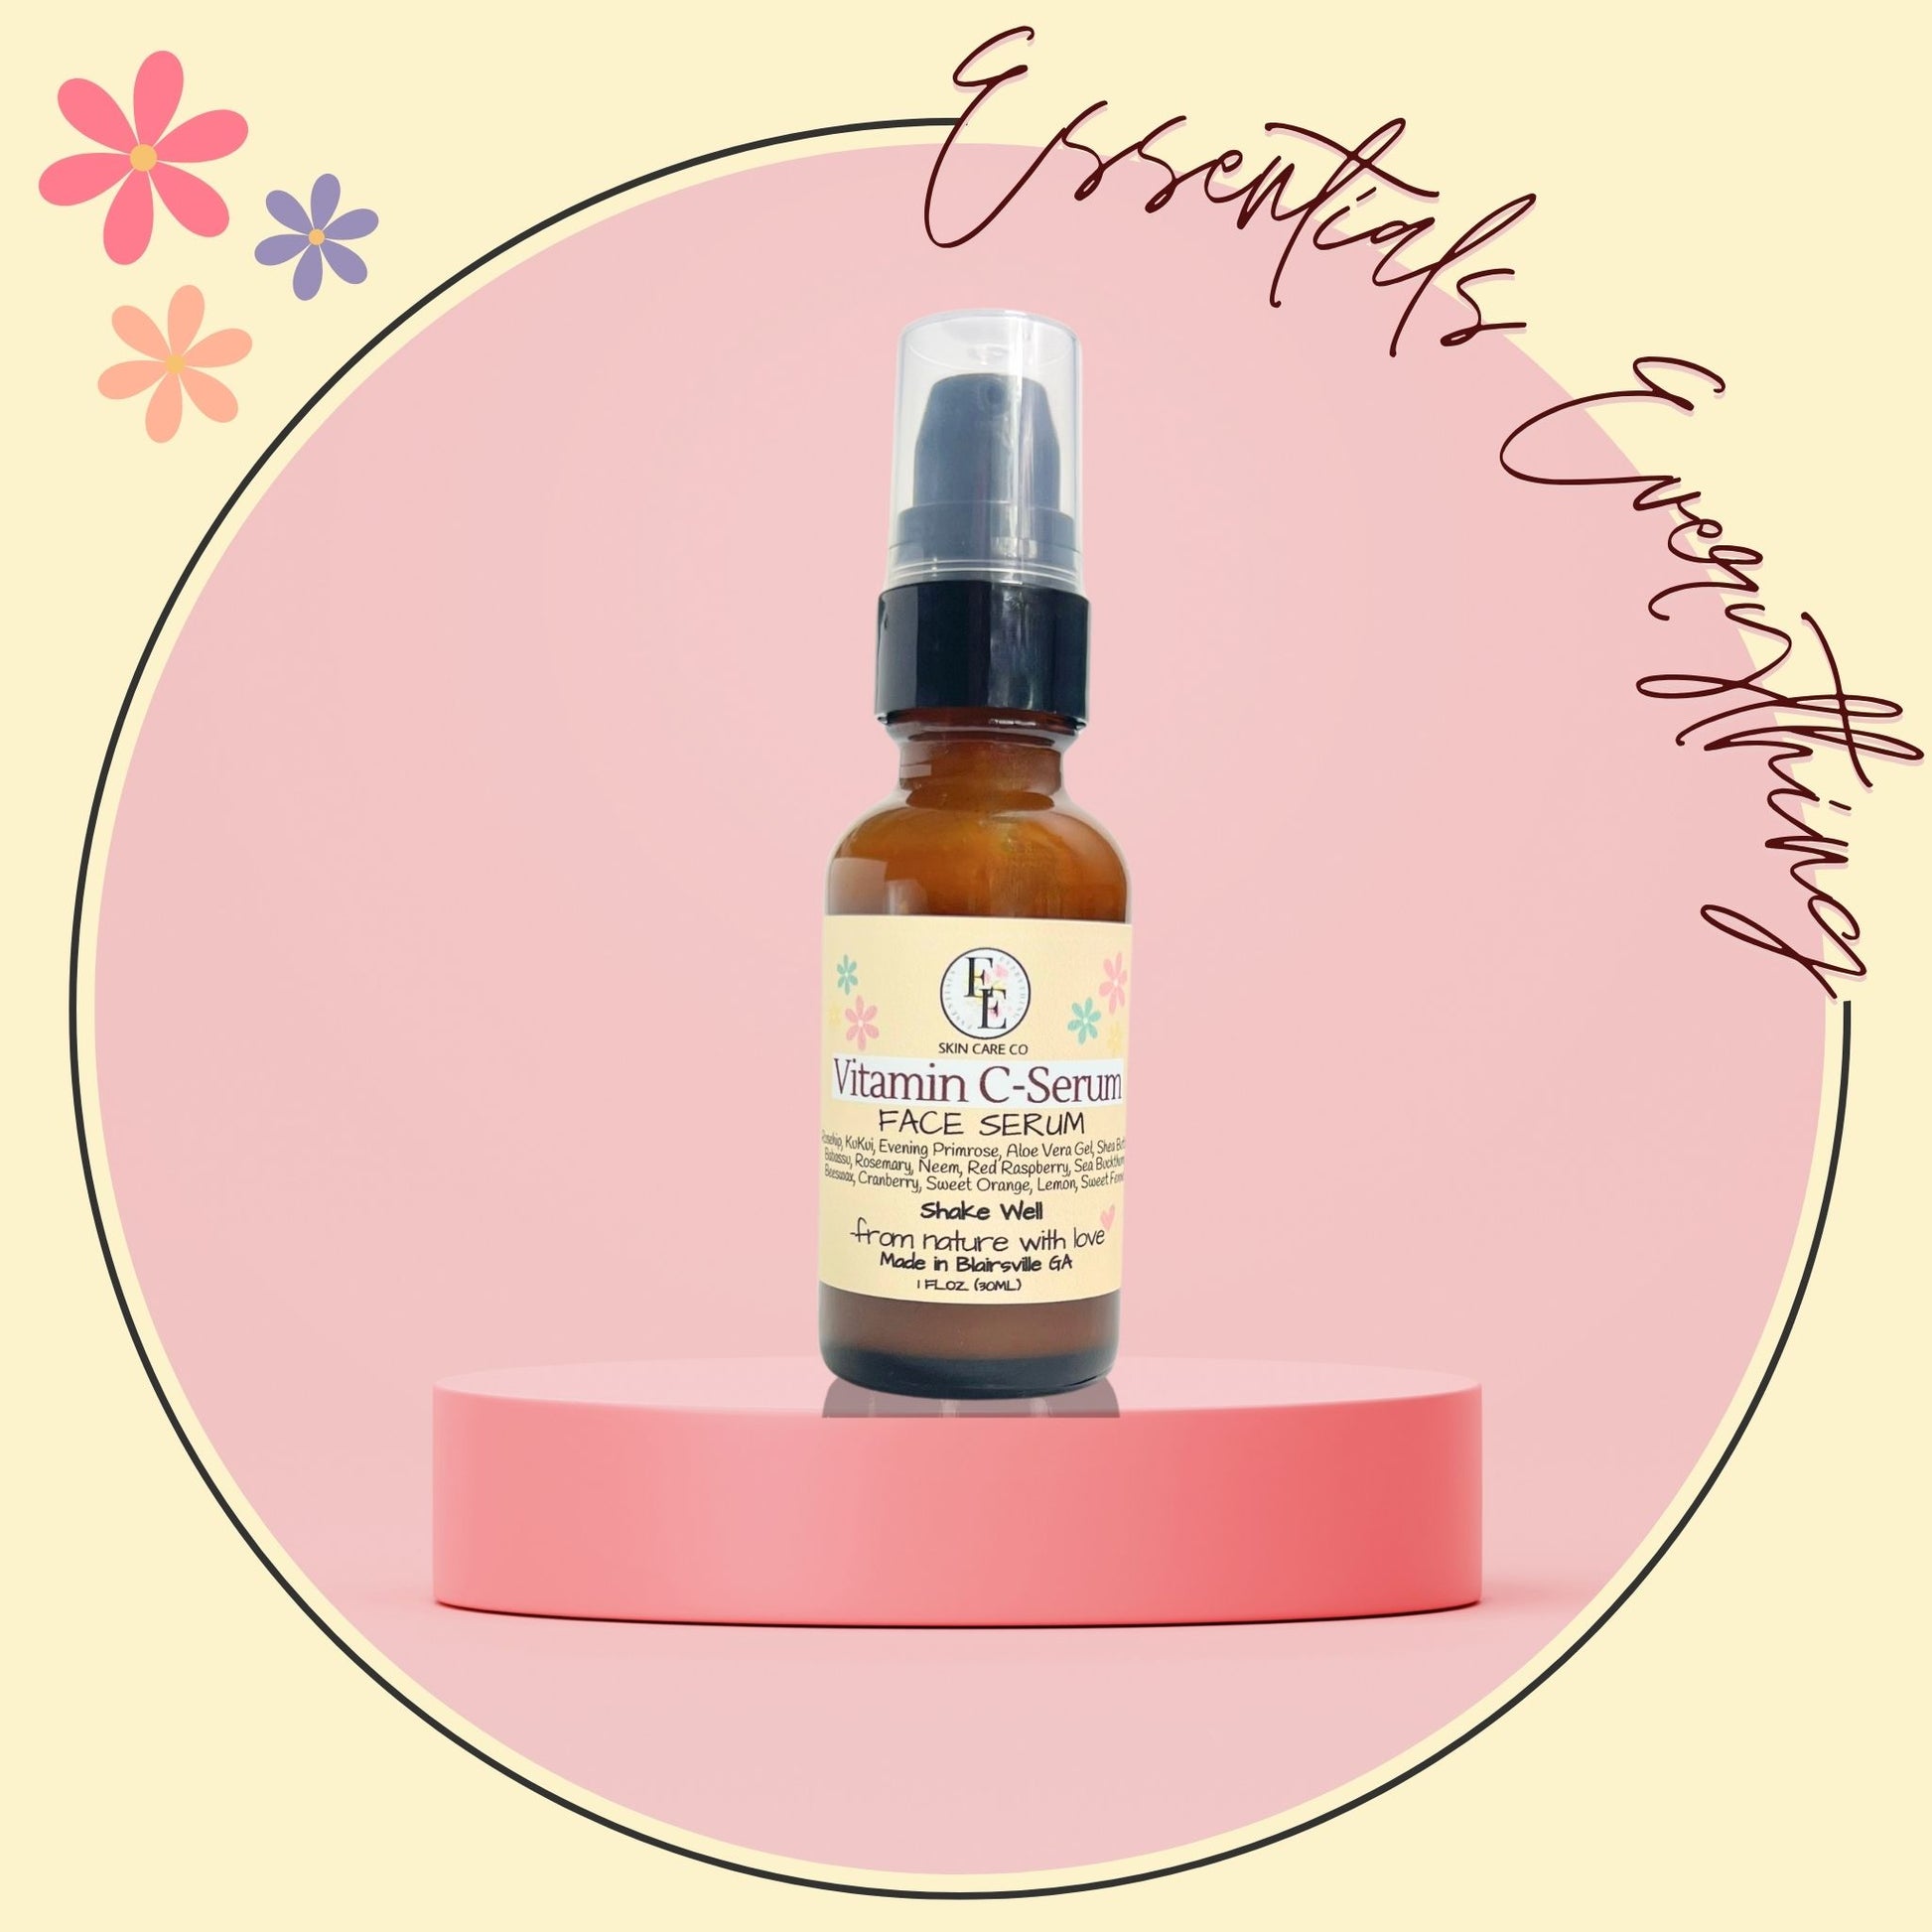 Vitamin C - All Natural Vitamin C Face Serum for All Skin Types by Essentials Everything Skin Care Co. 1 oz.